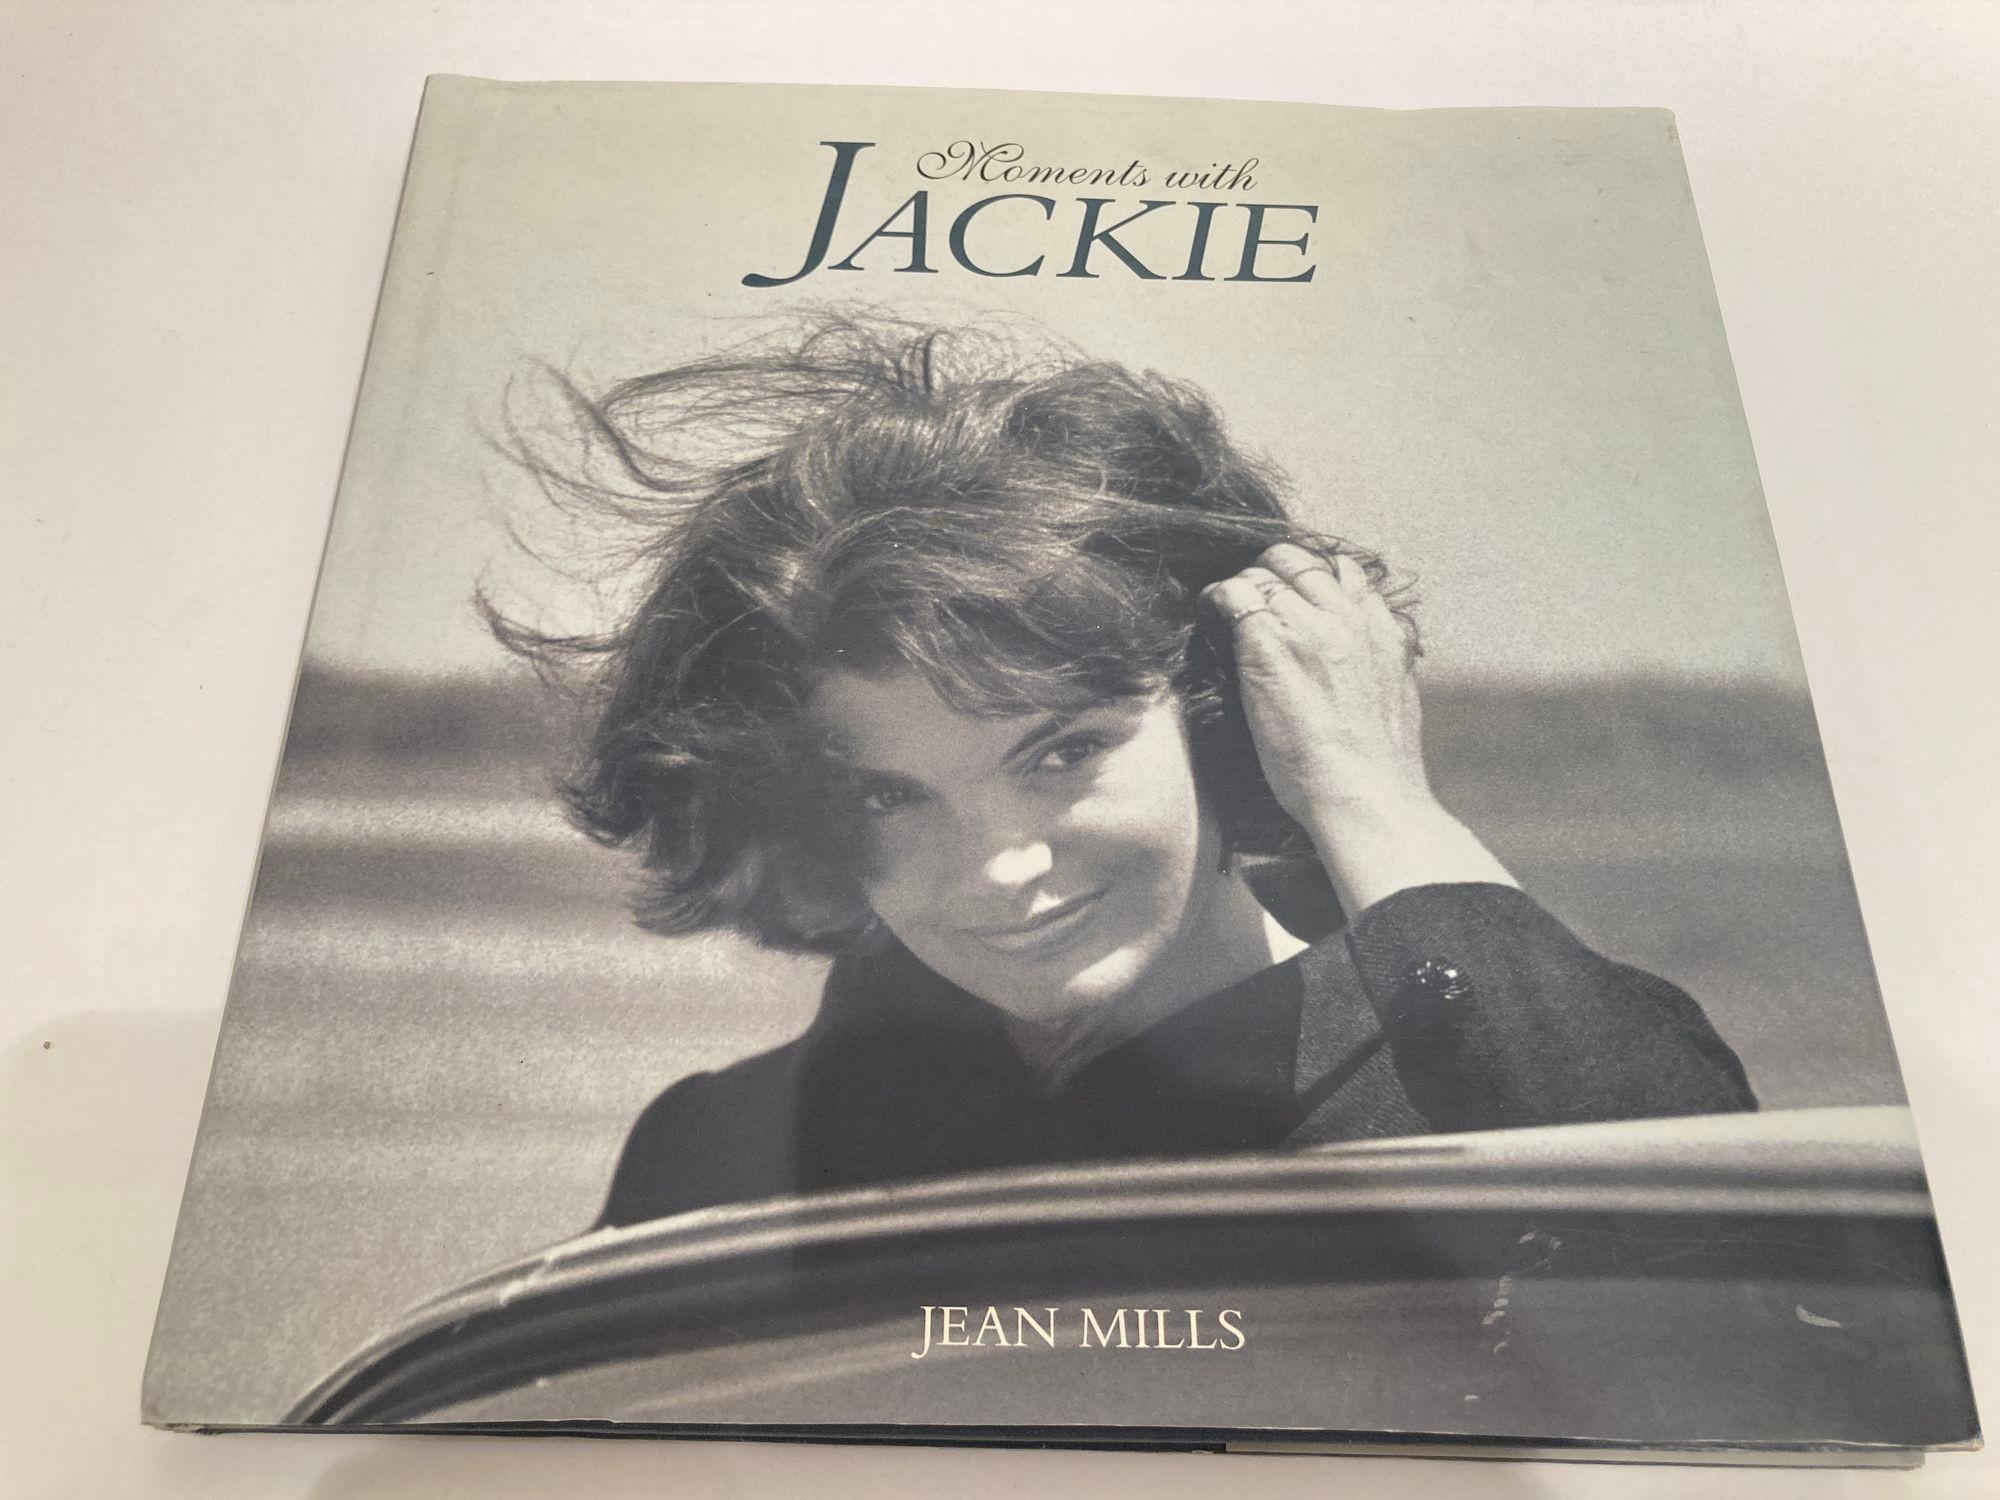 Moments with Jackie by Jean Mills hardcover book
Barnes & Noble Books, 1999 - Celebrities - 120 pages.
Stunning black-and-white photography accompanies a close-up portrait of Jacqueline Bouvier Kennedy Onassis.
One of the most influential figures